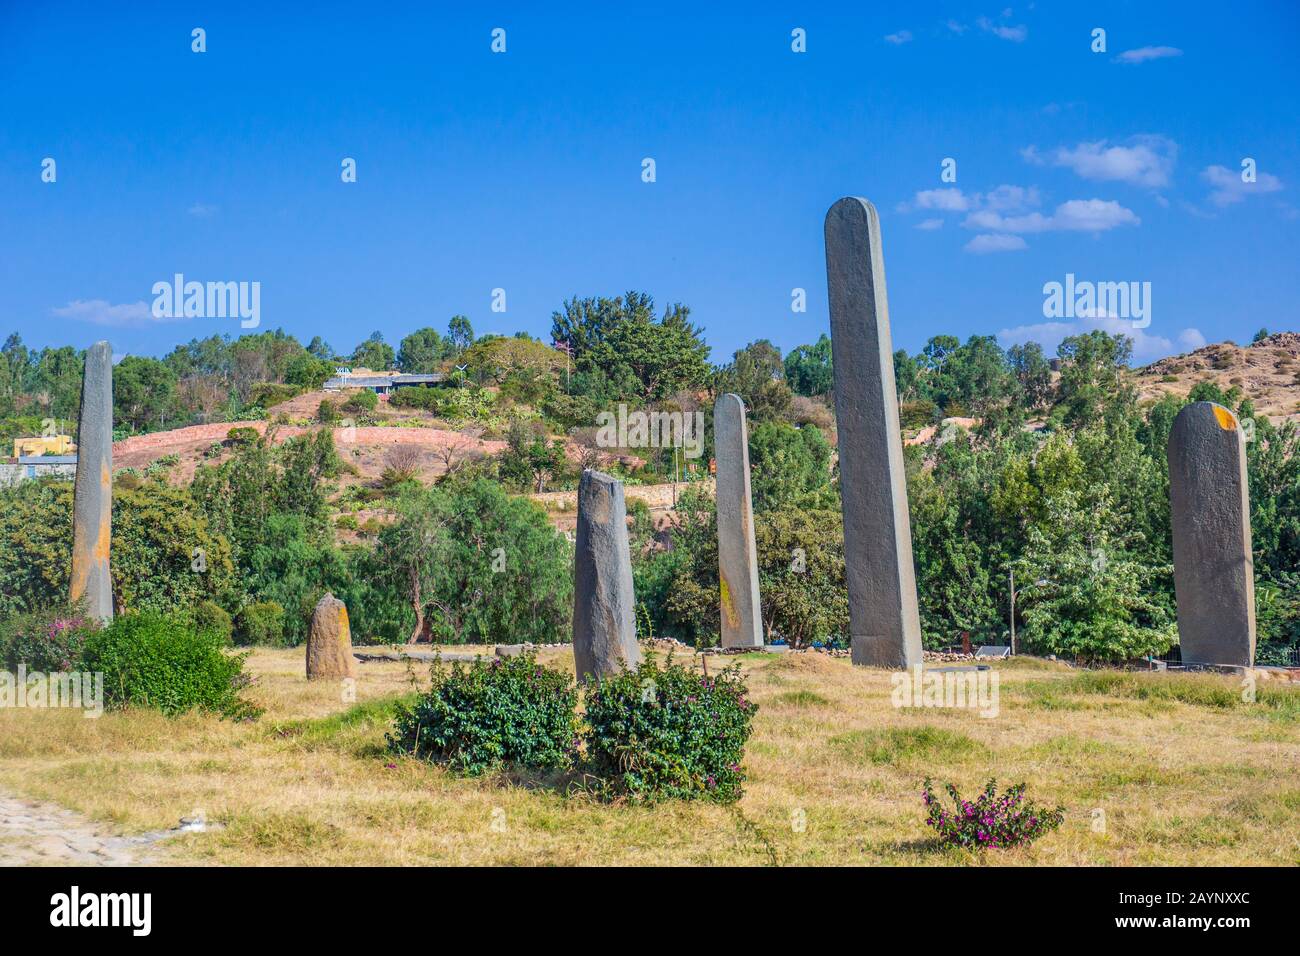 The ancient obelisks from the 4th century in Aksum, Ethiopia Stock Photo